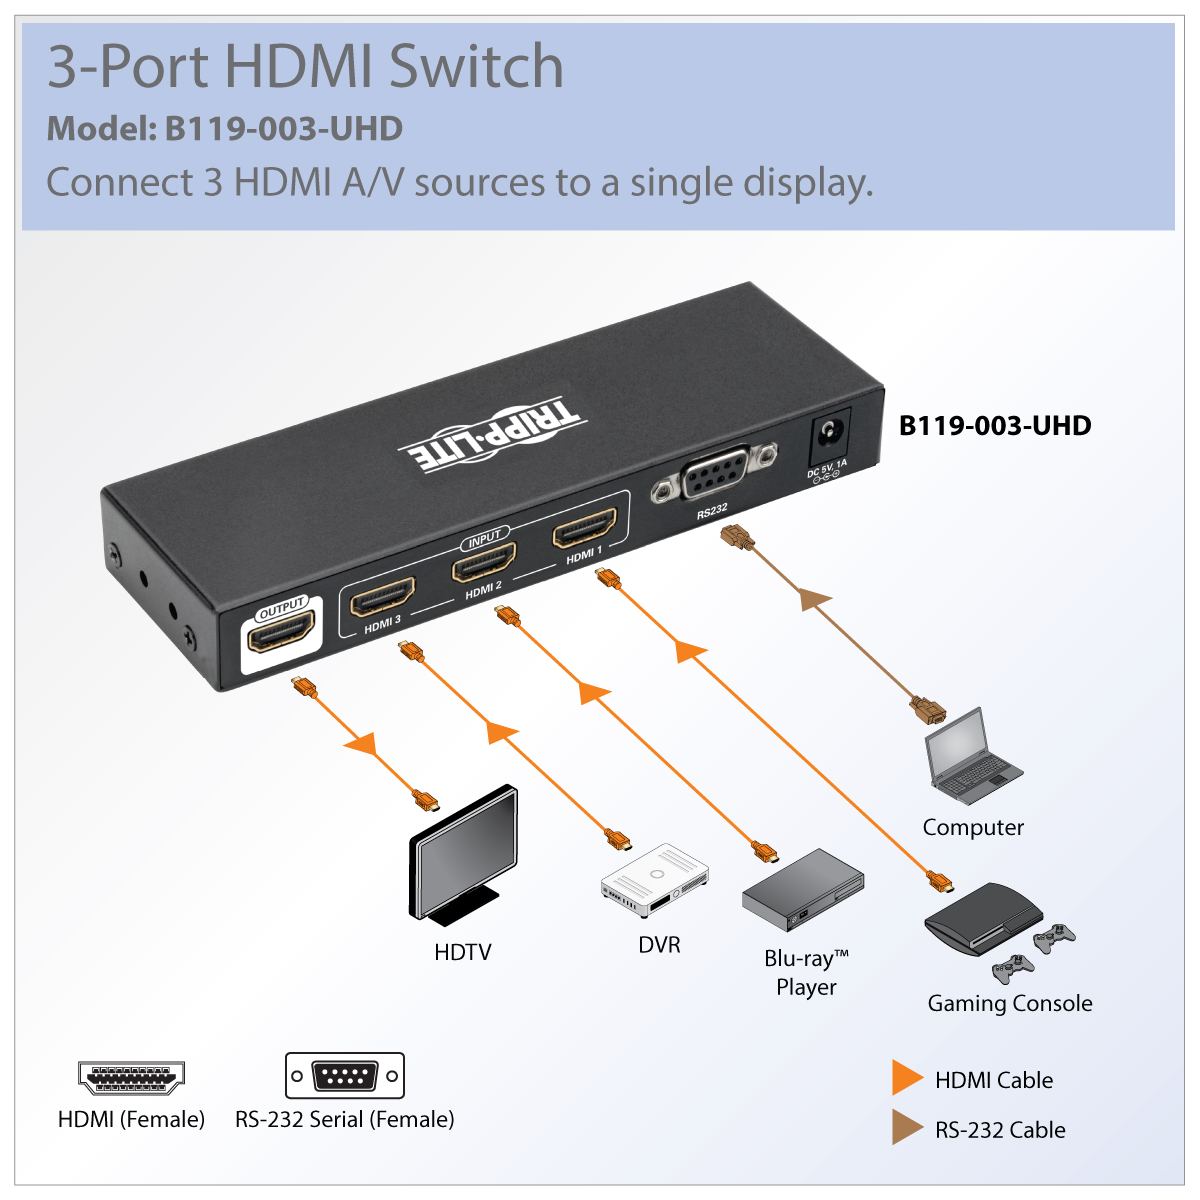 StarTech.com 2x1 VGA + HDMI to HDMI Switch / Selector Box - 1080p Multi  Video Input Automatic Switcher - 2 Computers In 1 Monitor Out (VS221VGA2HD)  - video/audio switch